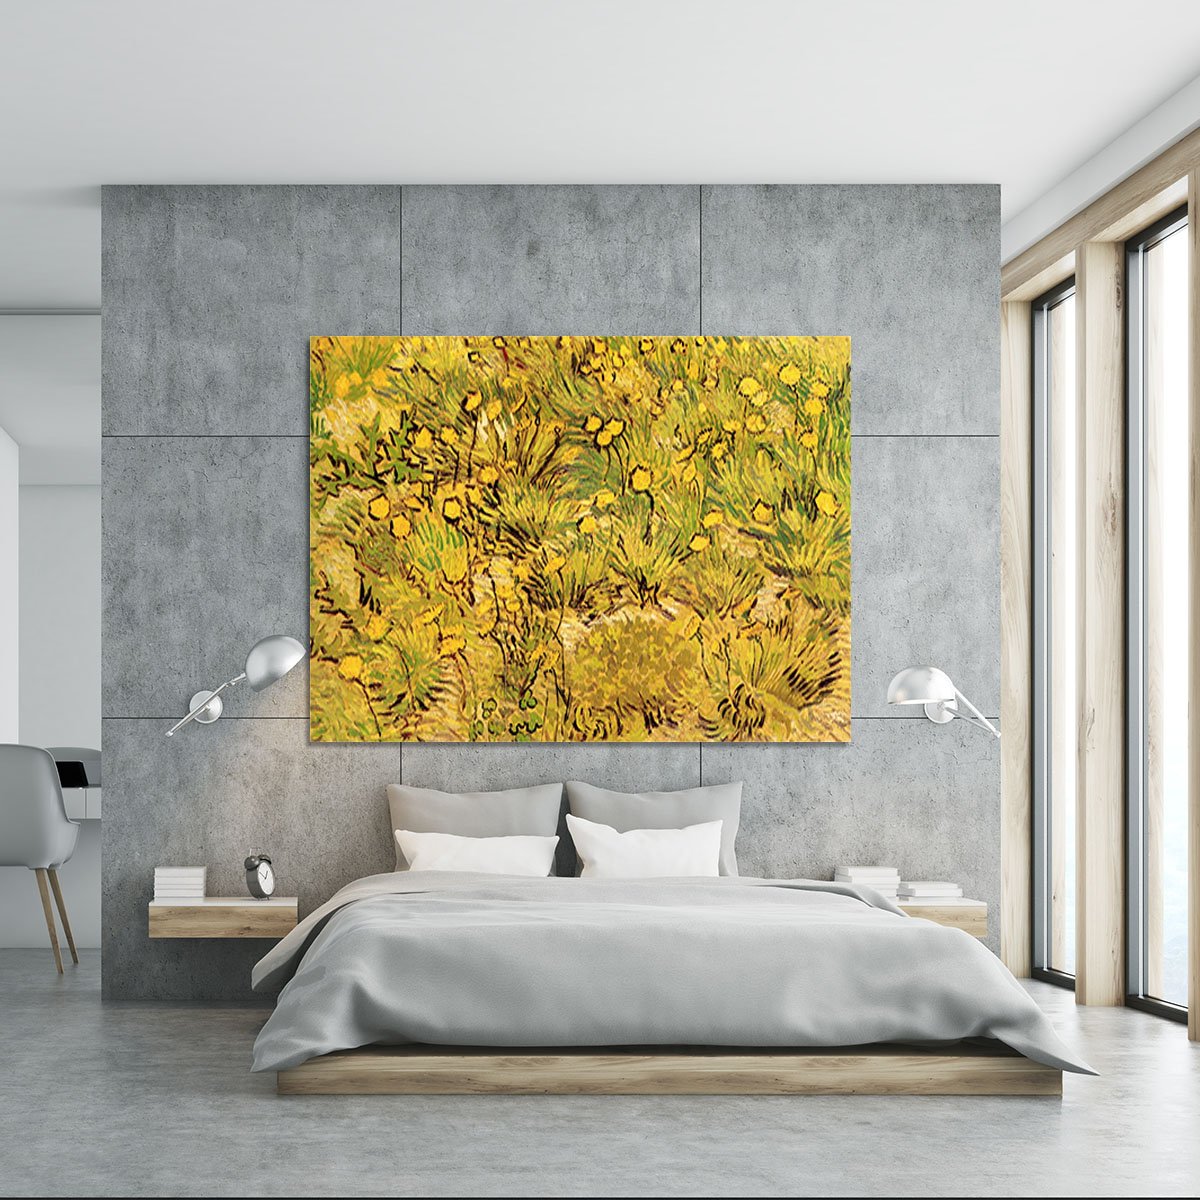 A Field of Yellow Flowers by Van Gogh Canvas Print or Poster